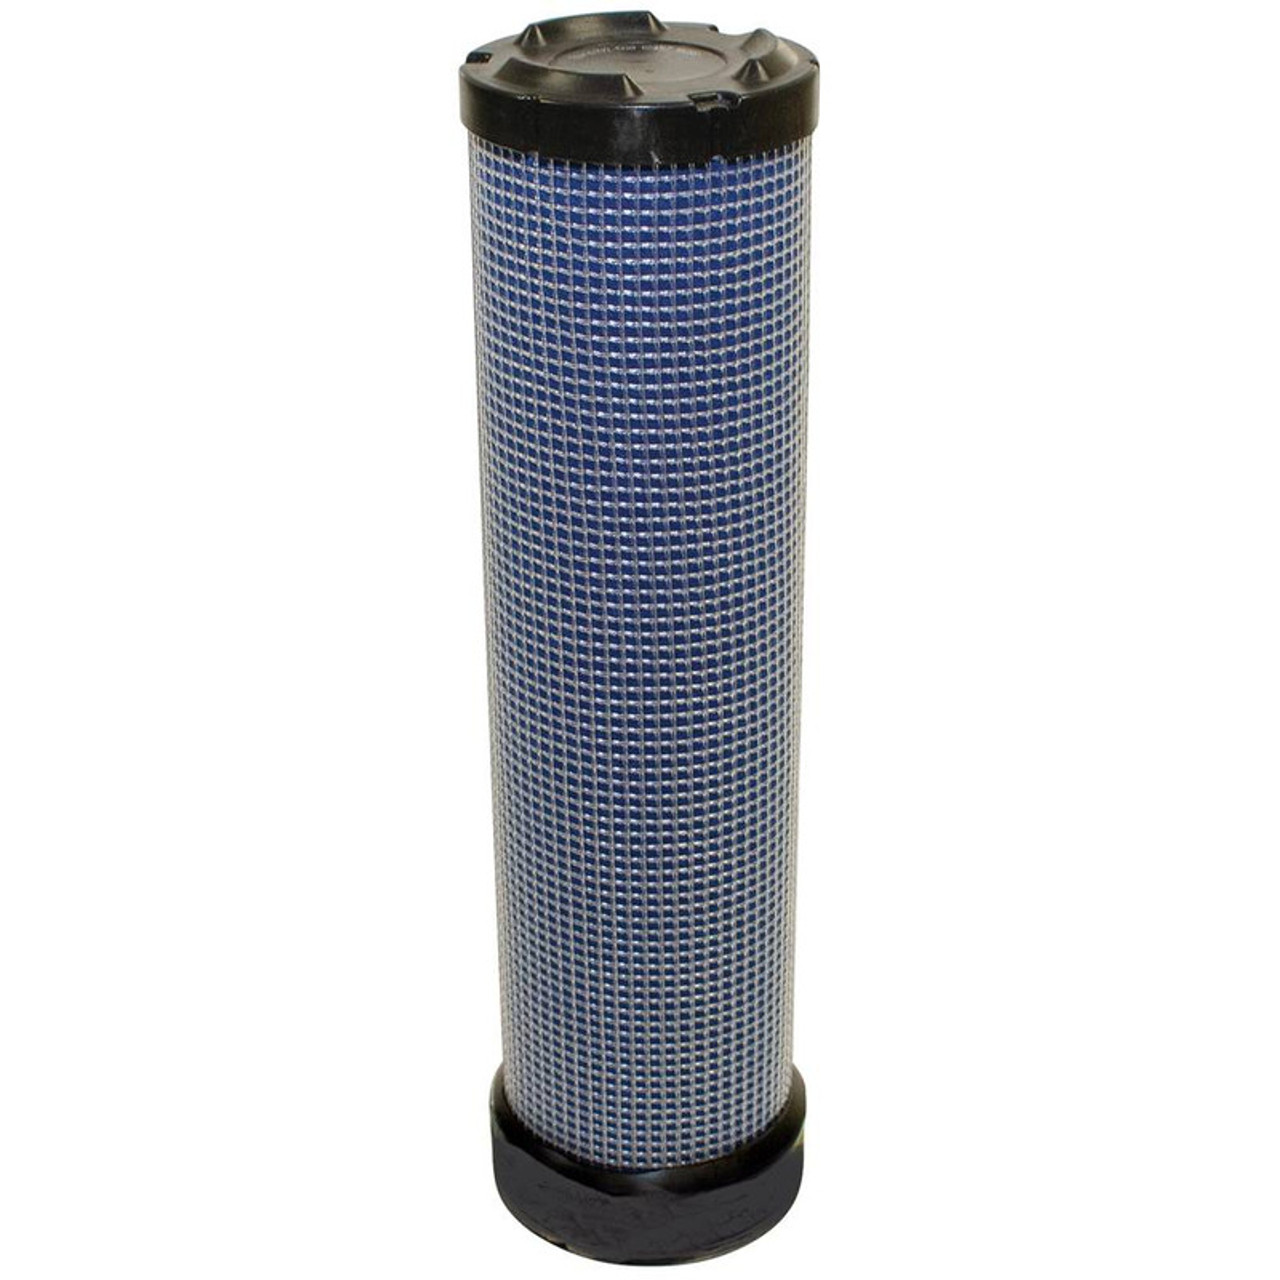 Inner Air Filter for Case TR270, TR320, TV380, 440, 445, 580 Super M, 590 Super N, 580N, SR200, SR220, SR250, SV250, SV300, 550H, 570LXT 570M 650G 650H 650K 750H 750K C100 C80 C90 CX100 CX80 1930590 222422A1 47128156 47132346 47132347 5080445